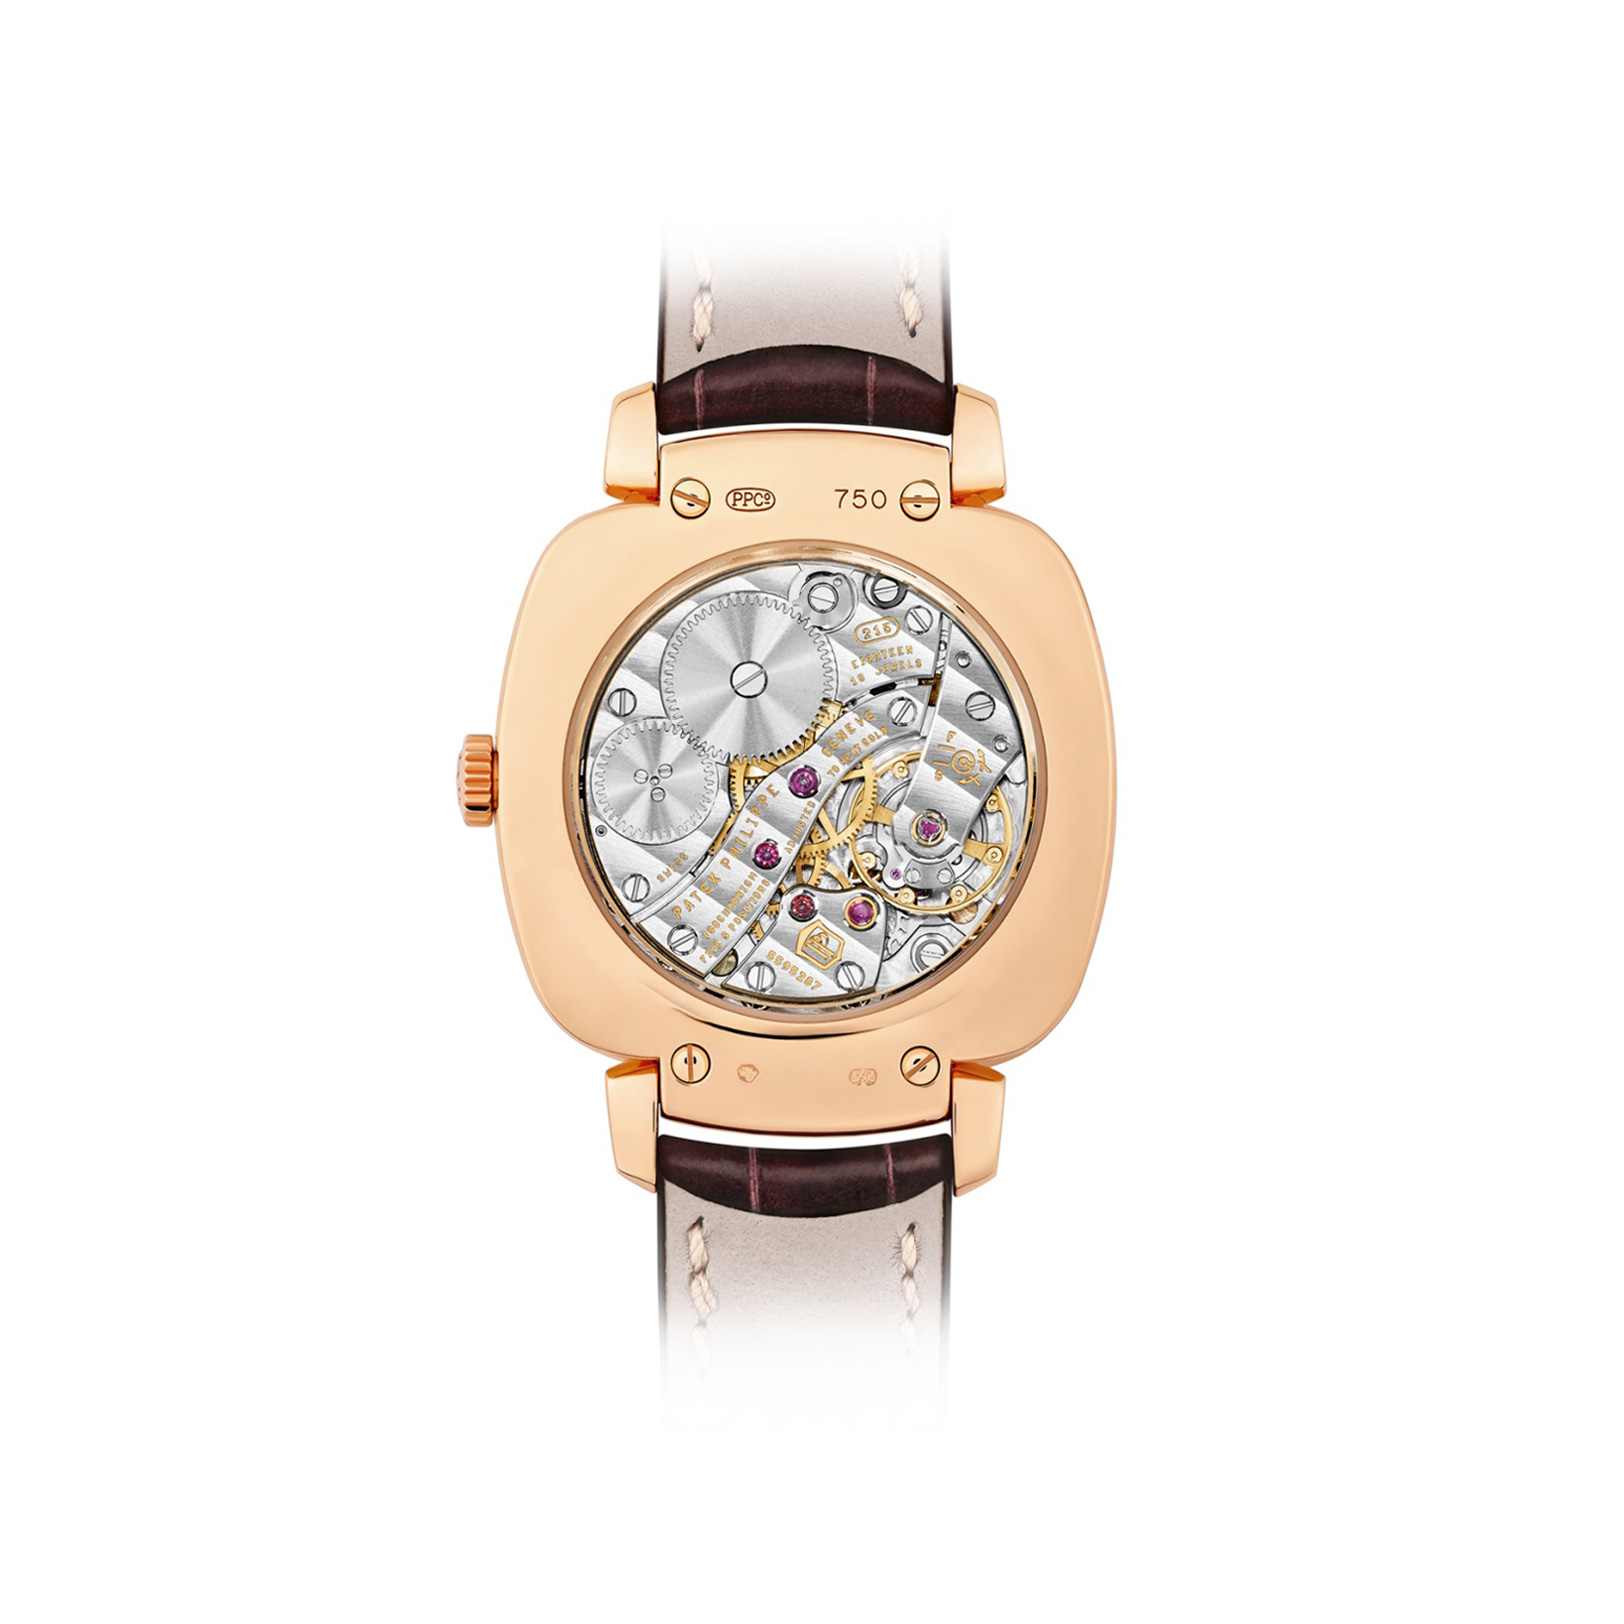 Gondolo Small Seconds Rose Gold gallery 1